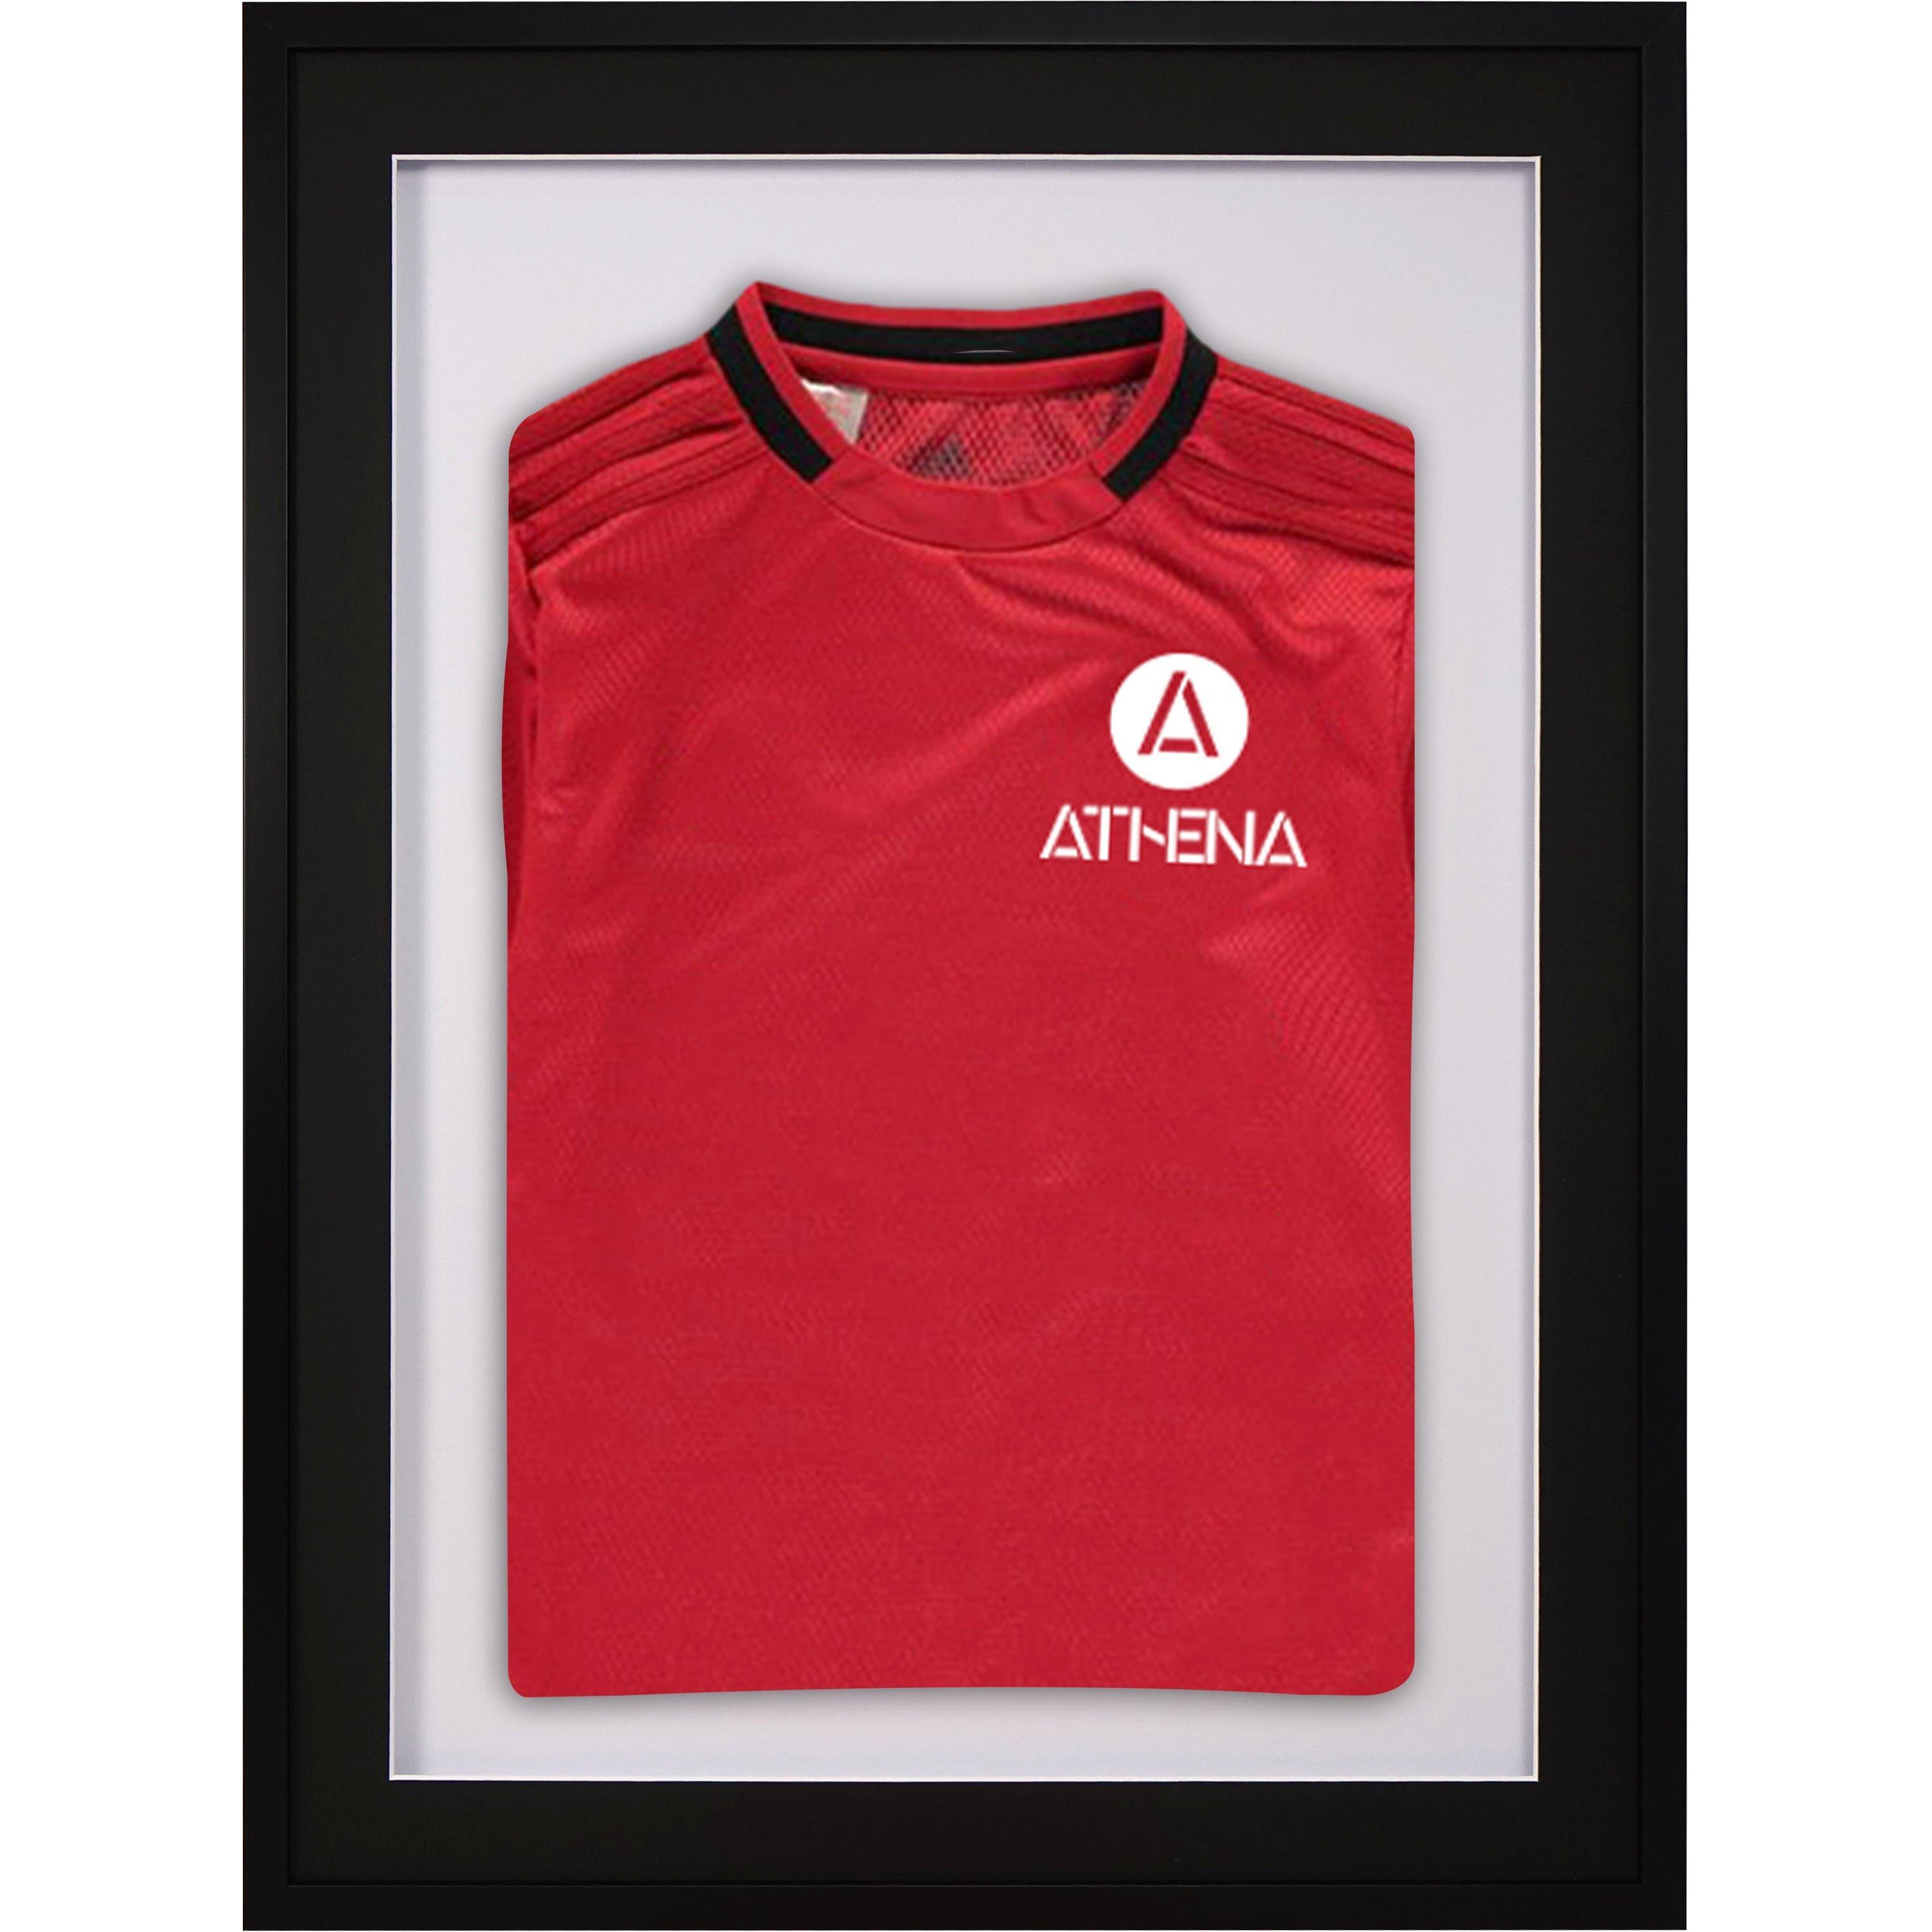 Athena 3D Mounted Sports Shirt Display Frame with Black Frame and Black Mount 60 x 80cm